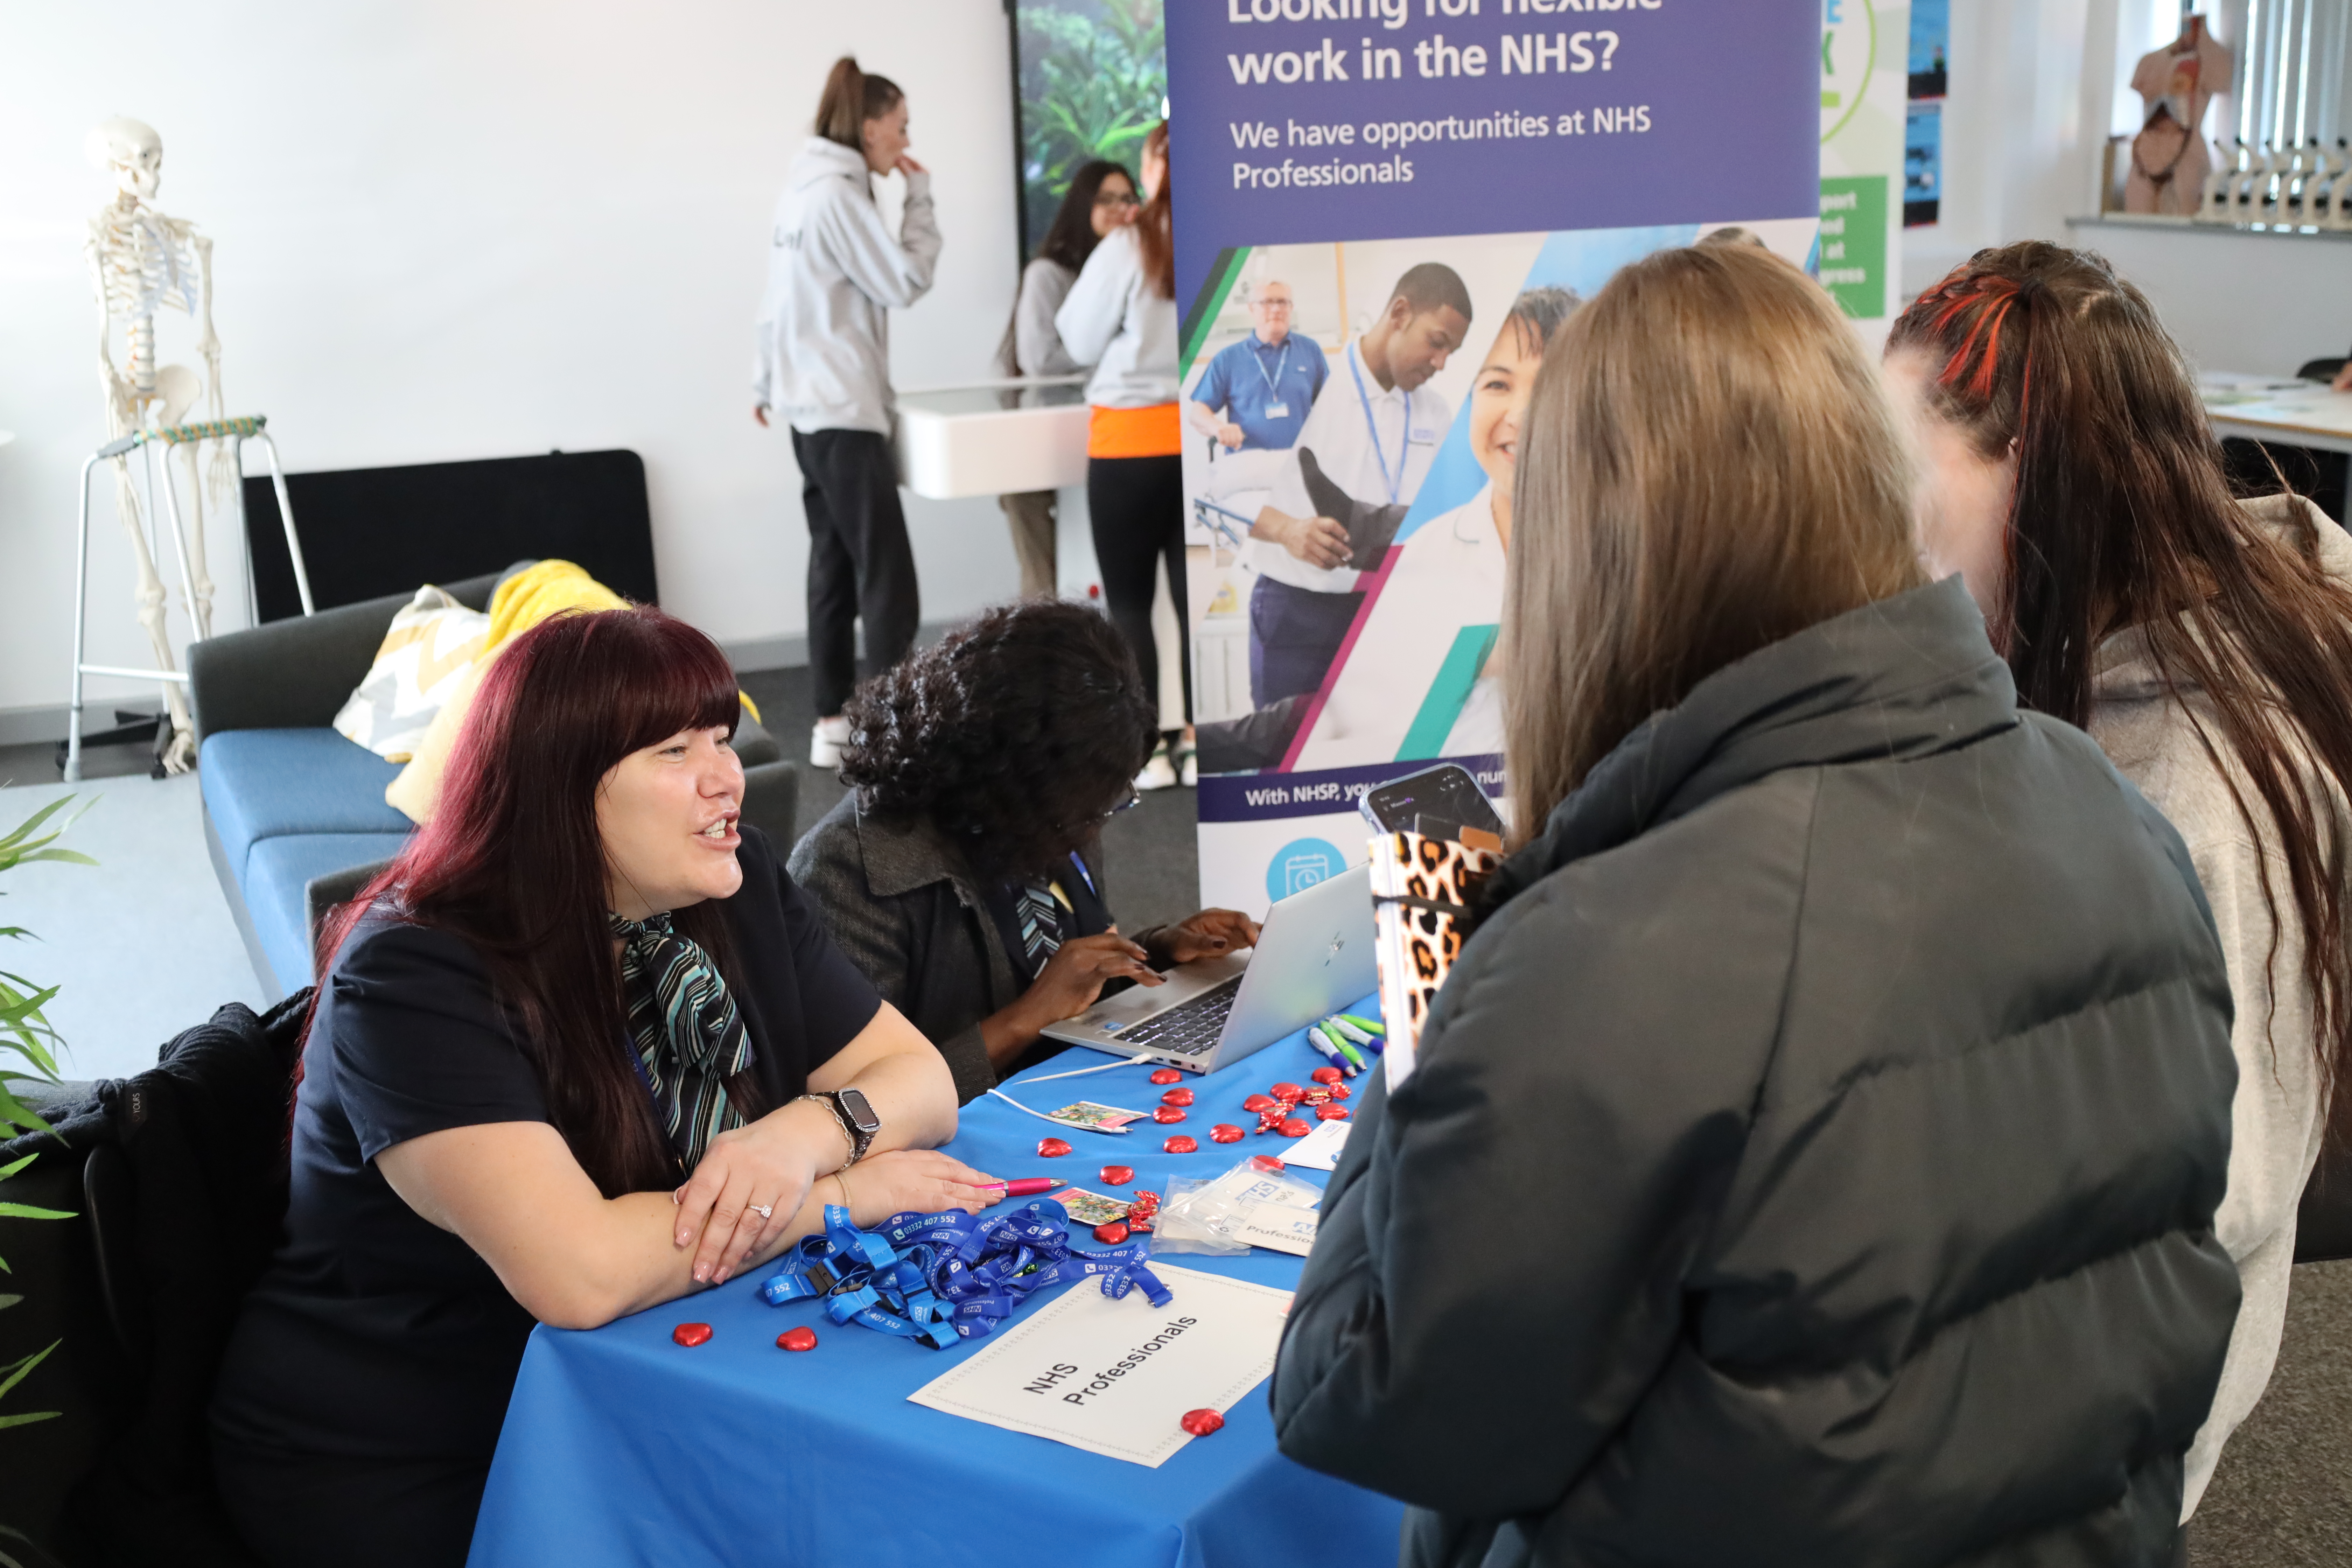 Careers Event